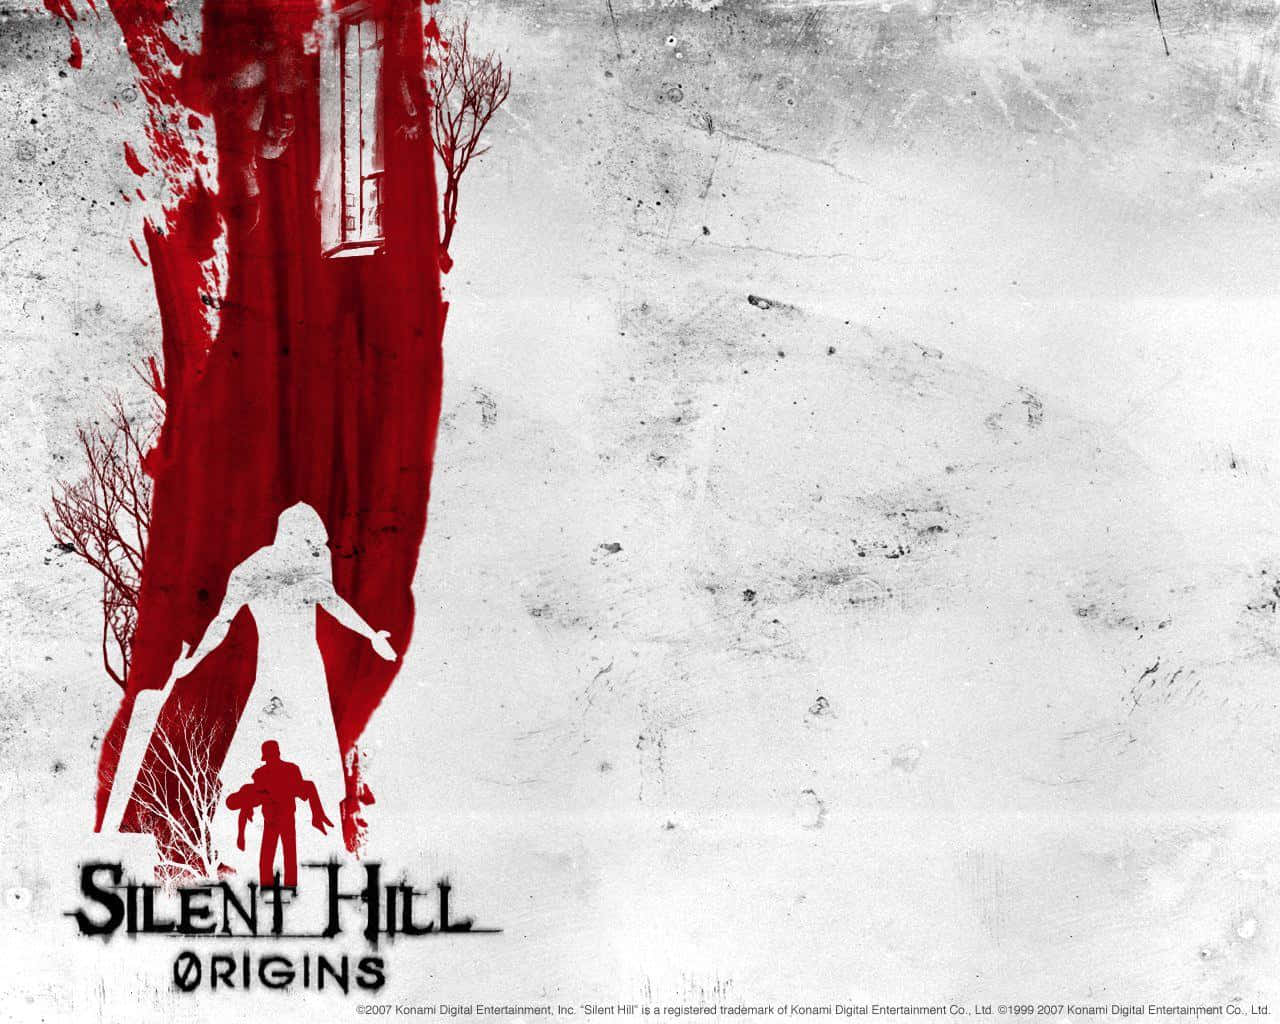 Explore the darkness of Silent Hill in this terrifying horror video game